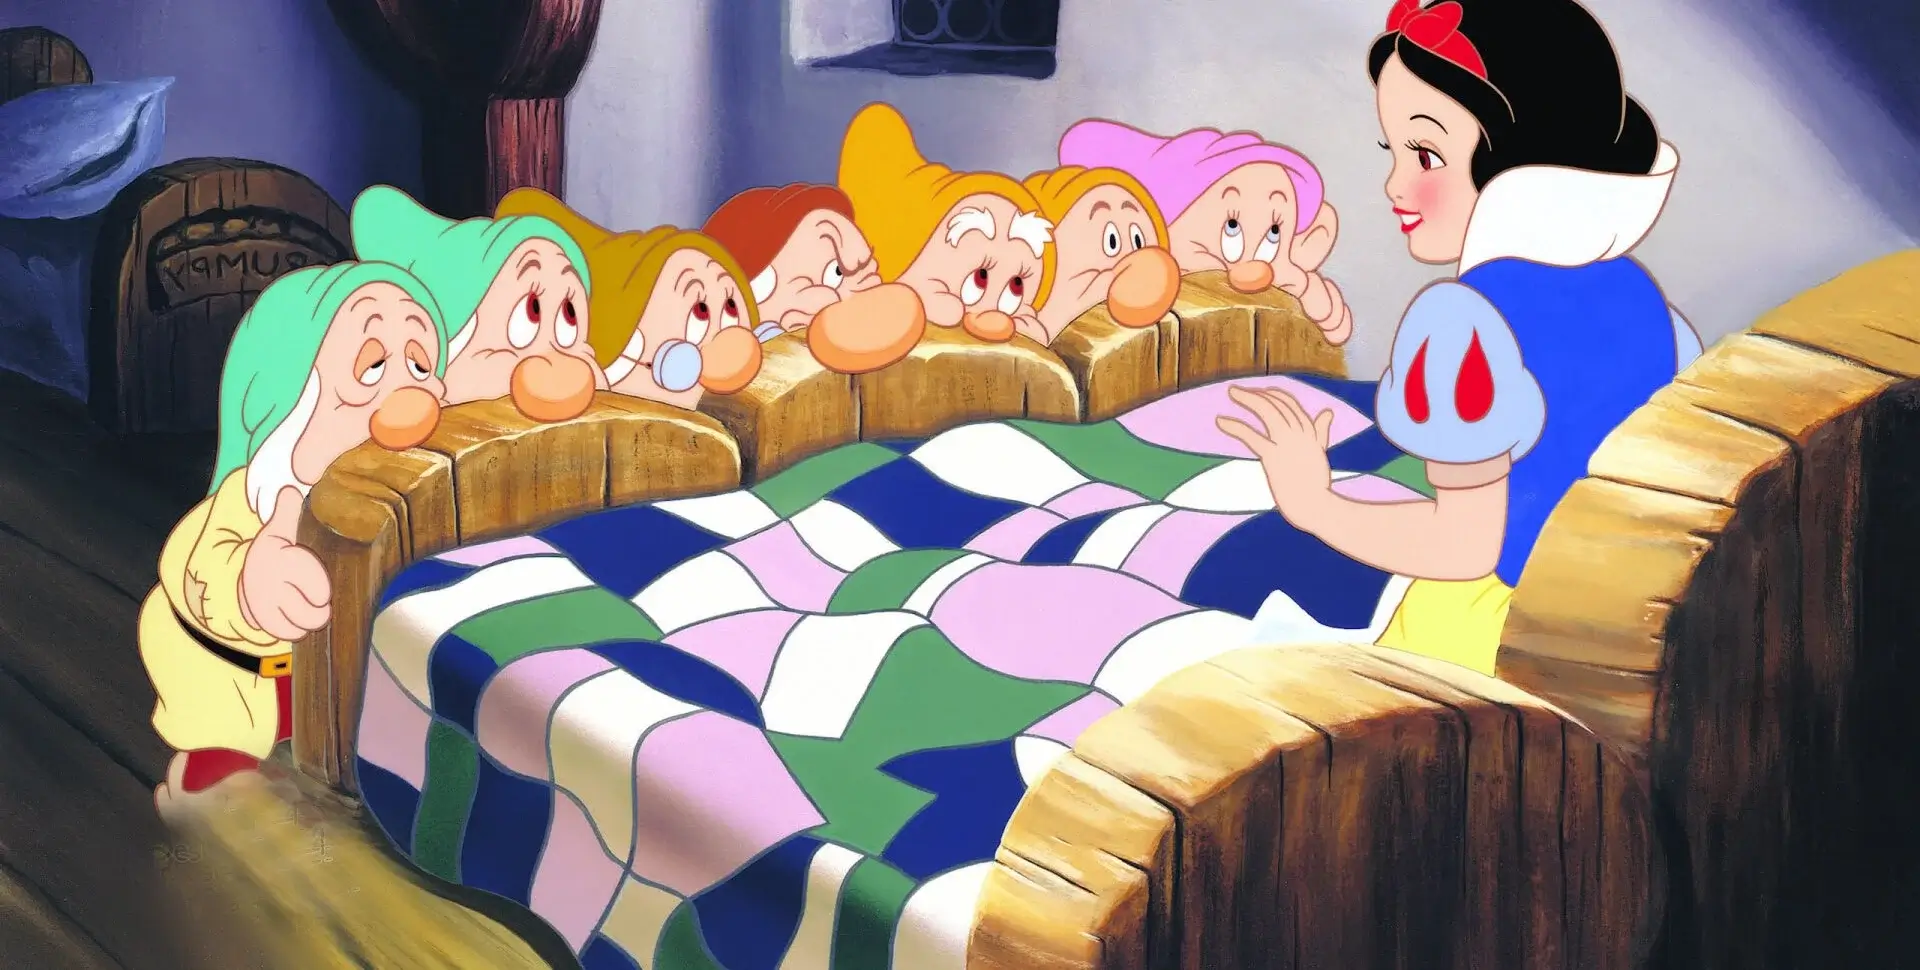 Snow White and the Seven Dwarfs 4K 1937 big poster